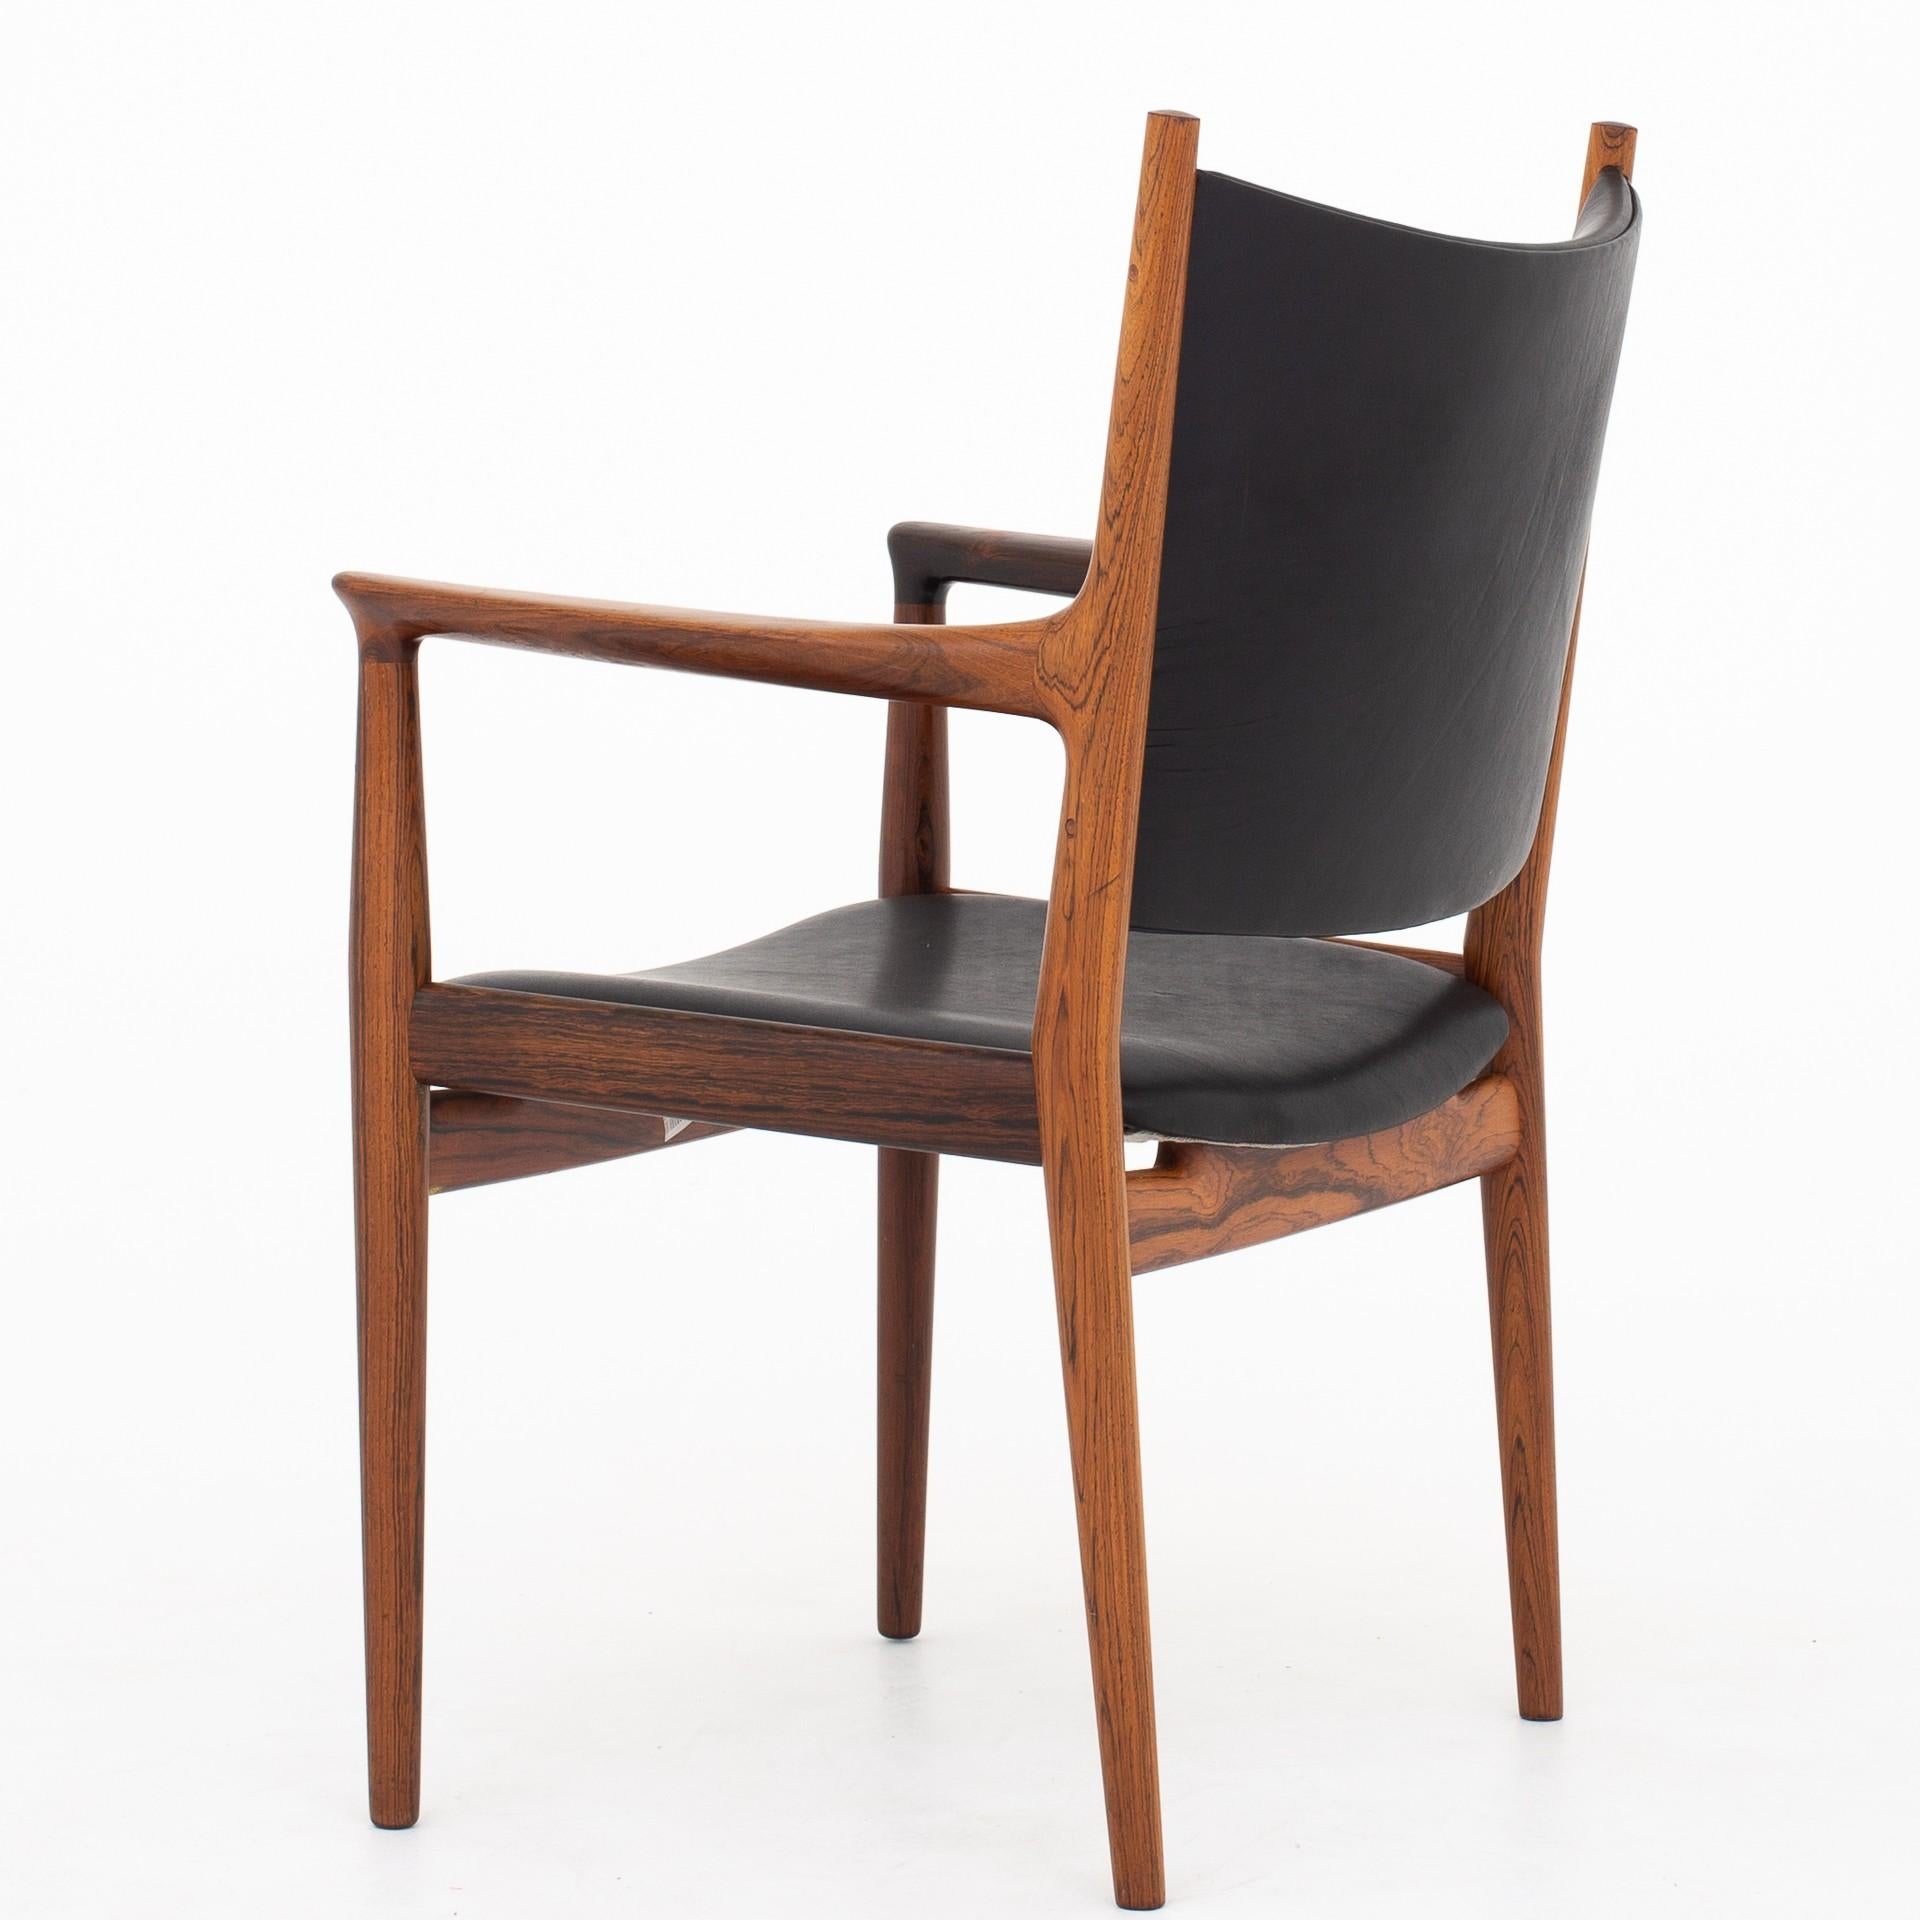 JH 513 - Armchair in rosewood, reupholstered in new Canyon leather. Johannes Hansen.